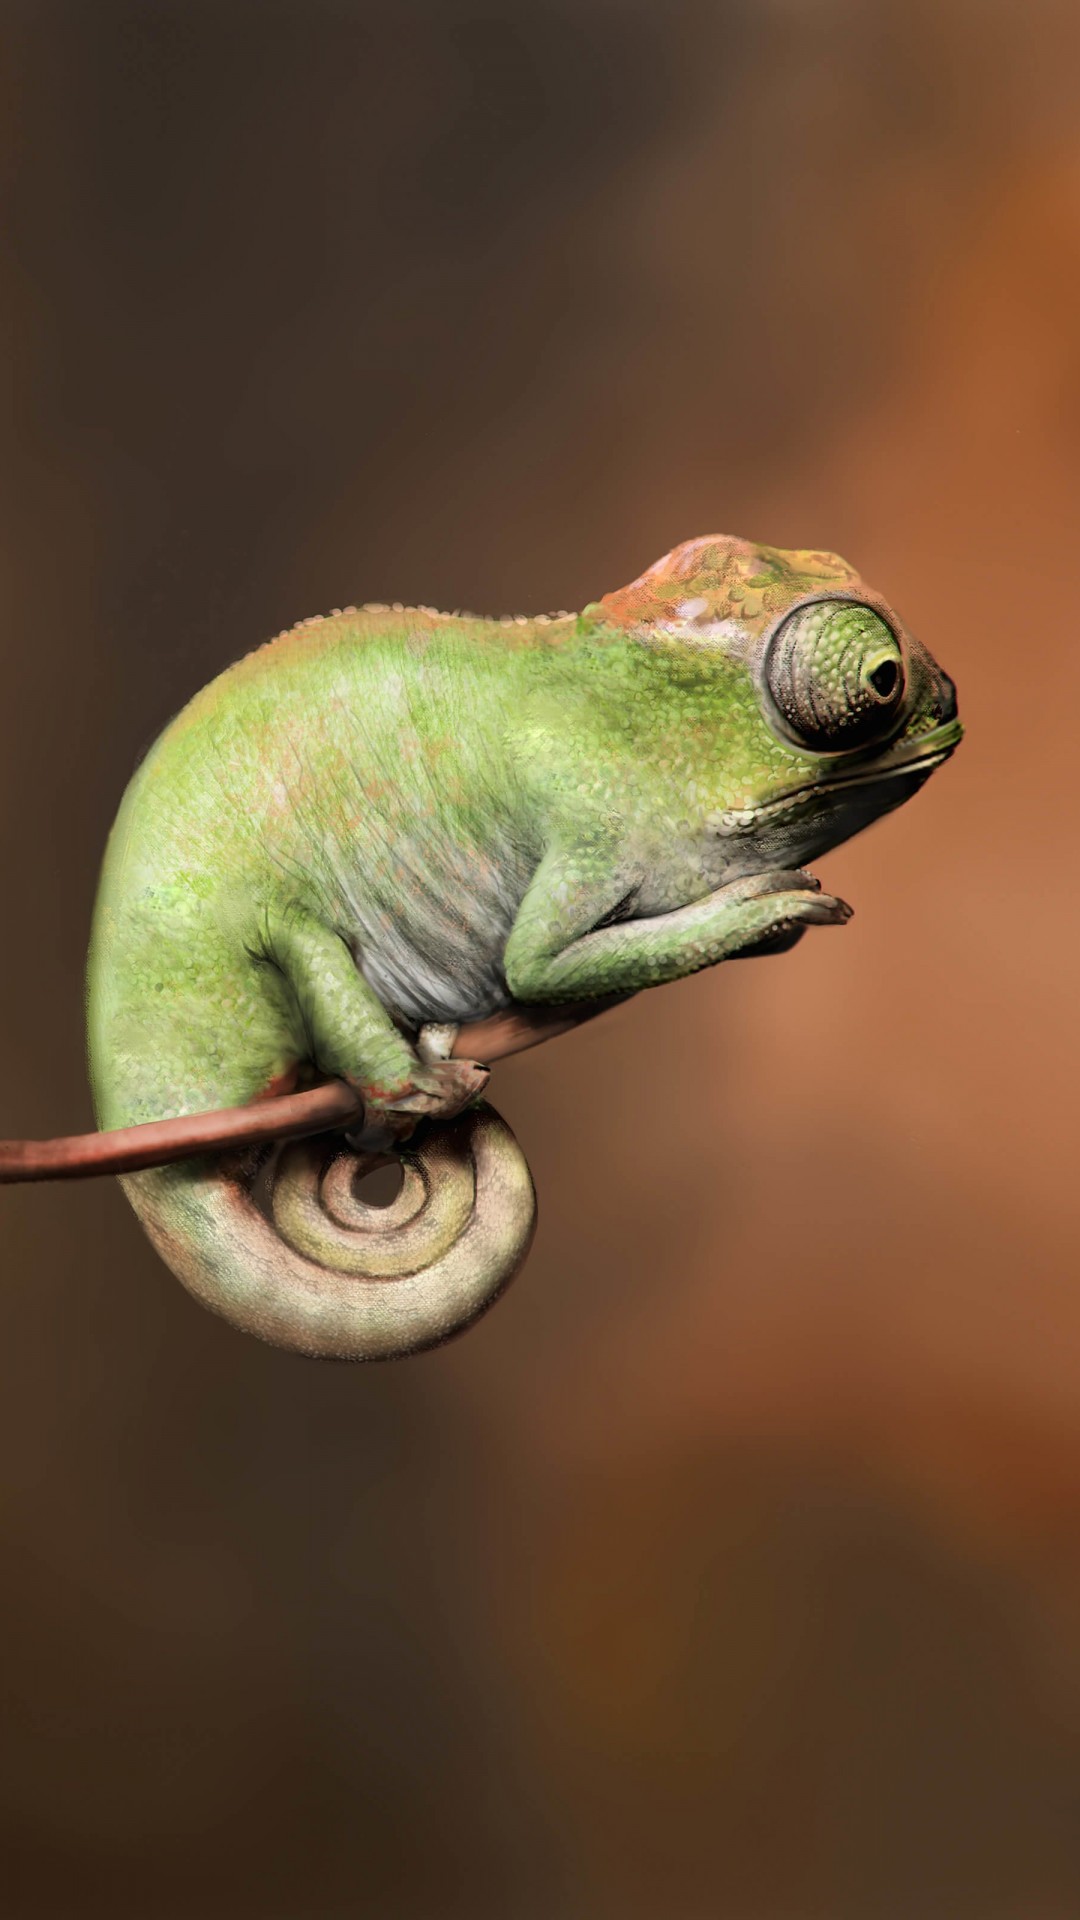 Baby Chameleon Perching On a Twisted Branch Wallpaper for SAMSUNG Galaxy Note 3